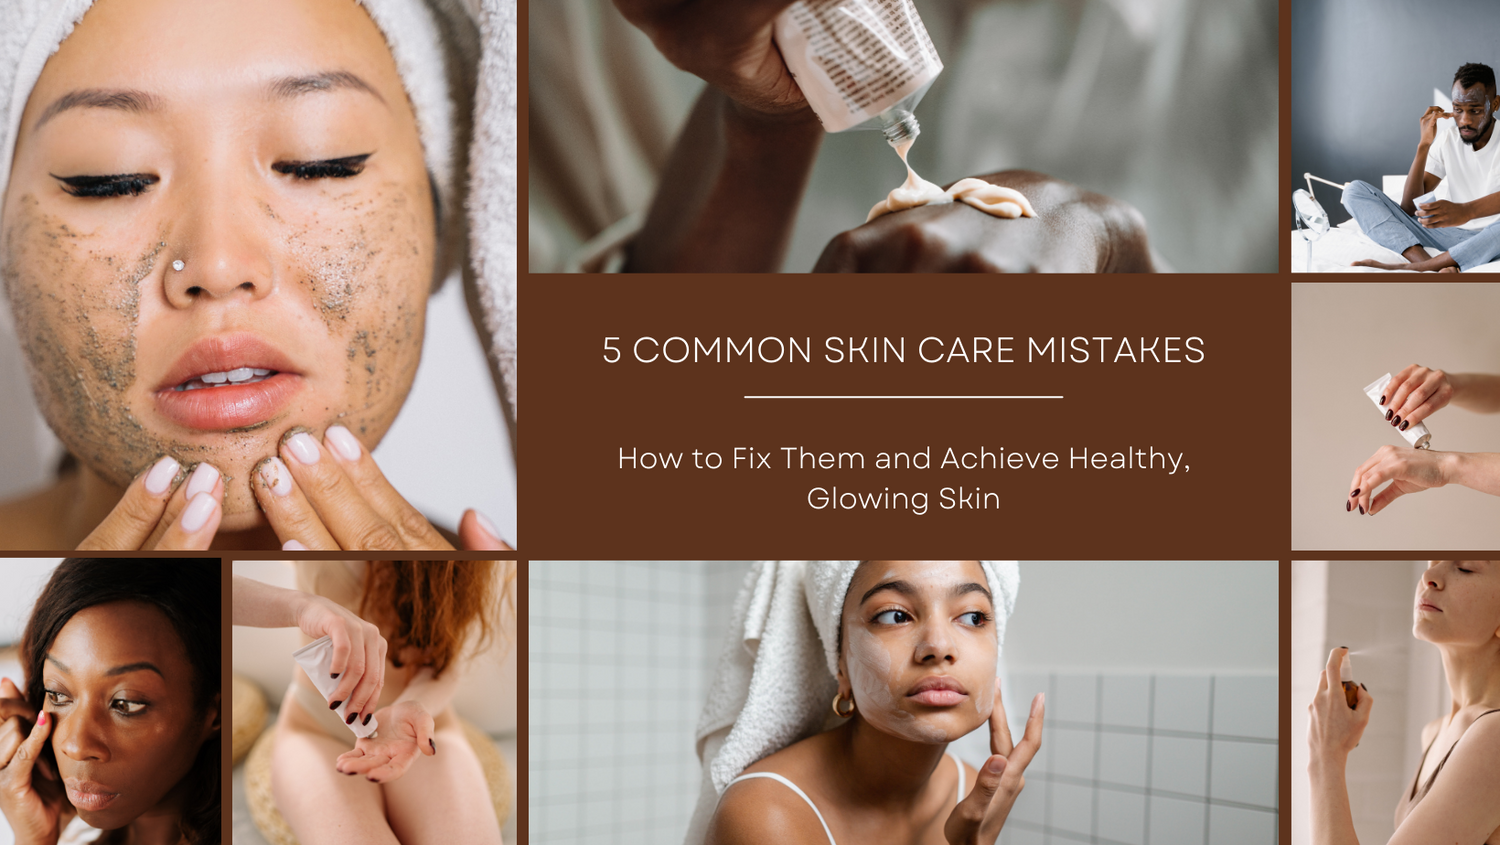 "5 Common Skincare Mistakes That Could Be Damaging Your Skin - How to Fix Them and Achieve Healthy, Glowing Skin"